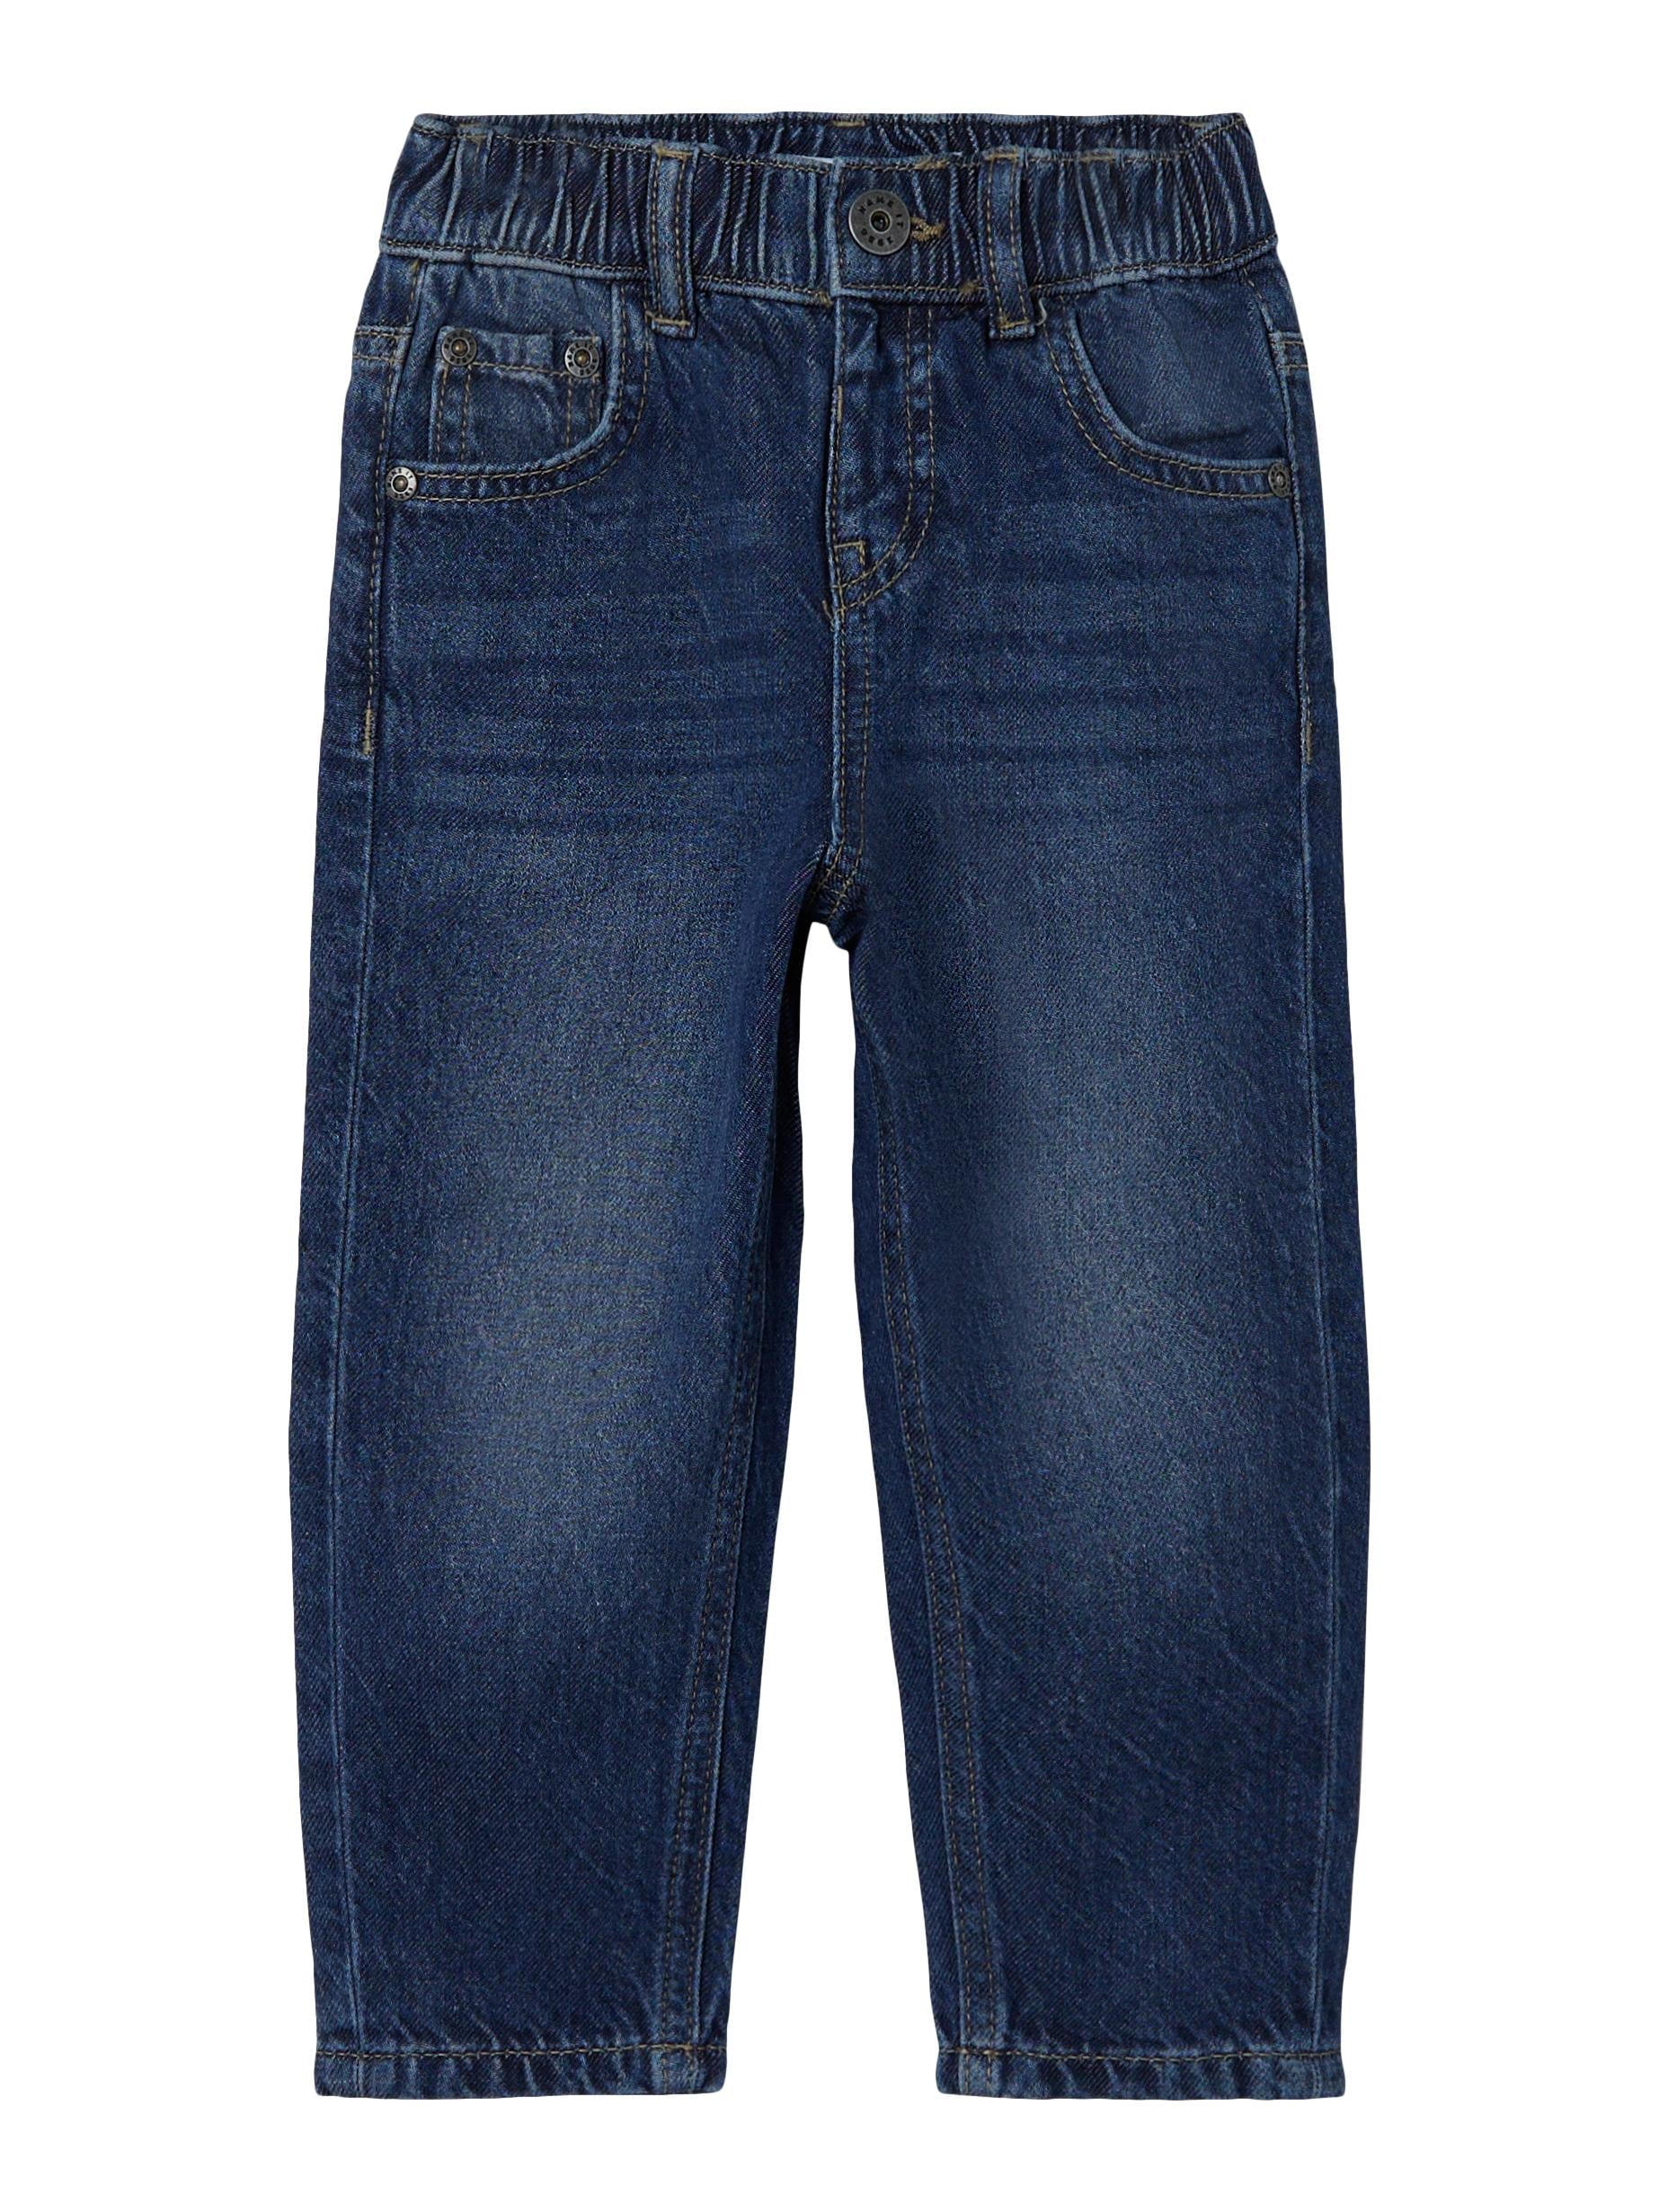 Name It 5-Pocket-Jeans »NMNSYDNEY TAPERED bei NOOS« 2415-OY ♕ JEANS